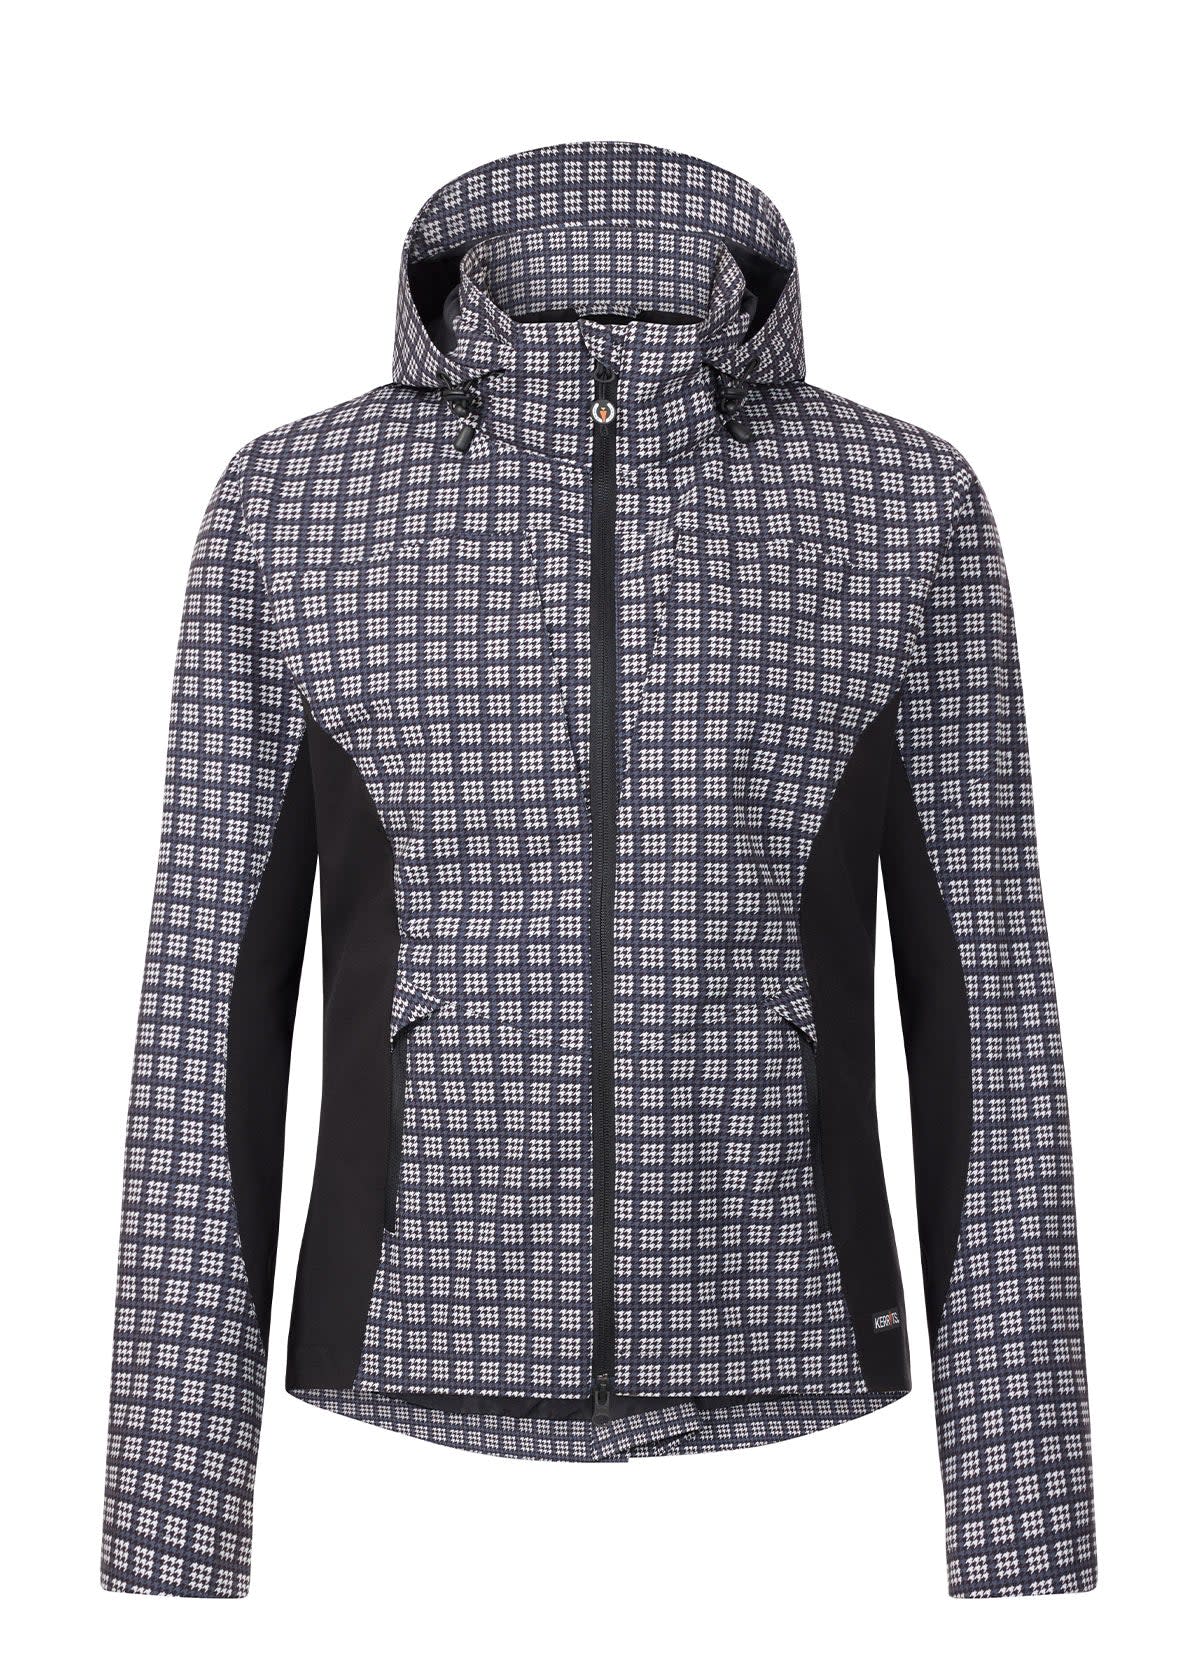 Kerrits Women's Rein Check Waterproof Shell - Black Houndstooth Plaid -  Kerrits-40712-BLKHTPLD - Tack Of The Day